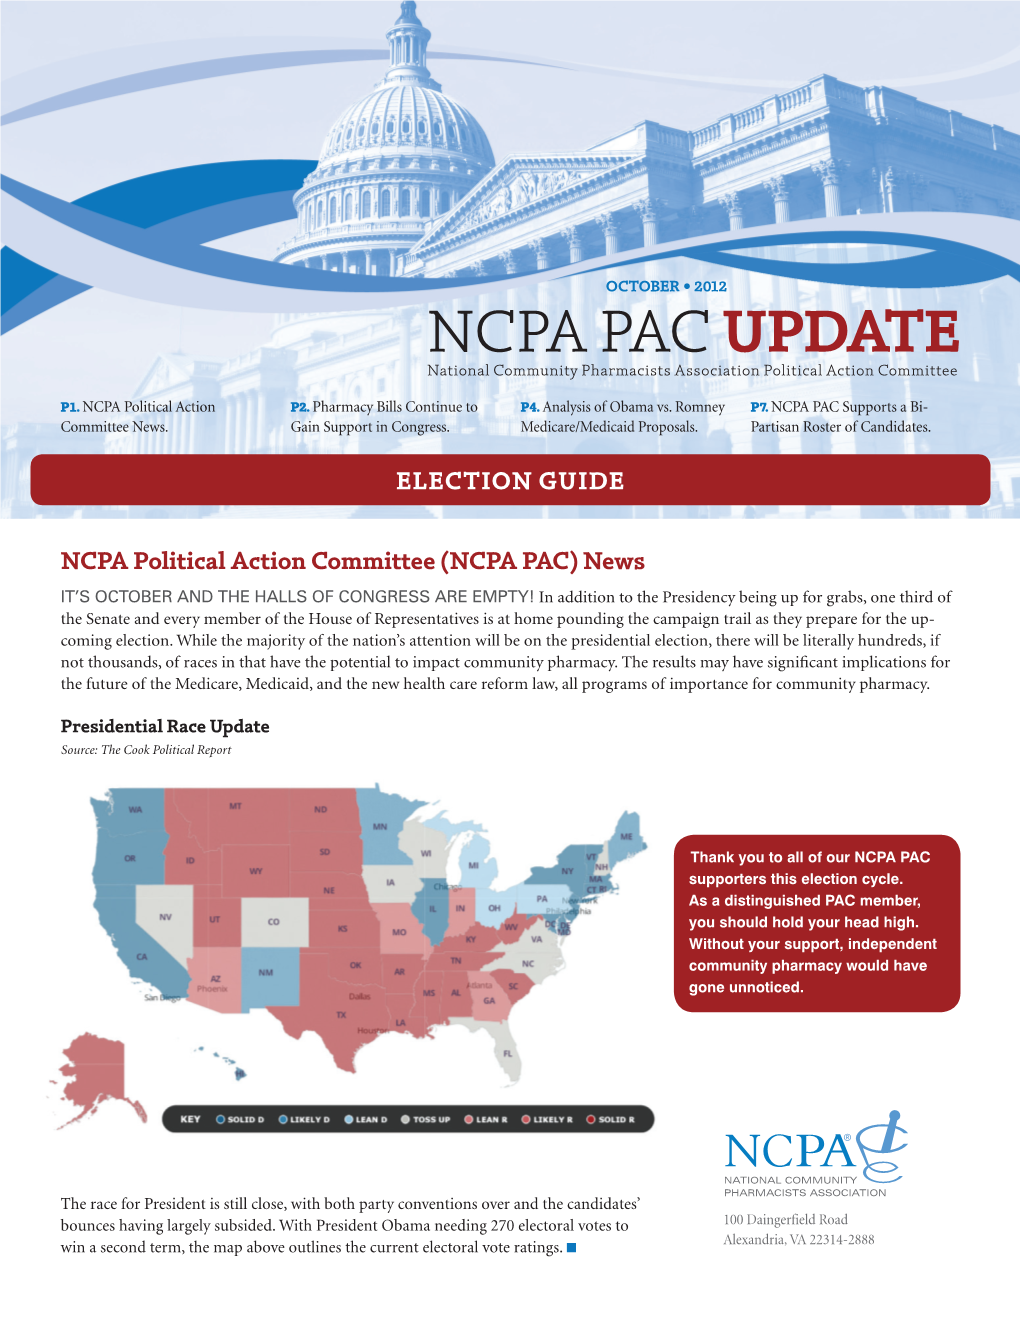 NCPA PAC UPDATE National Community Pharmacists Association Political Action Committee